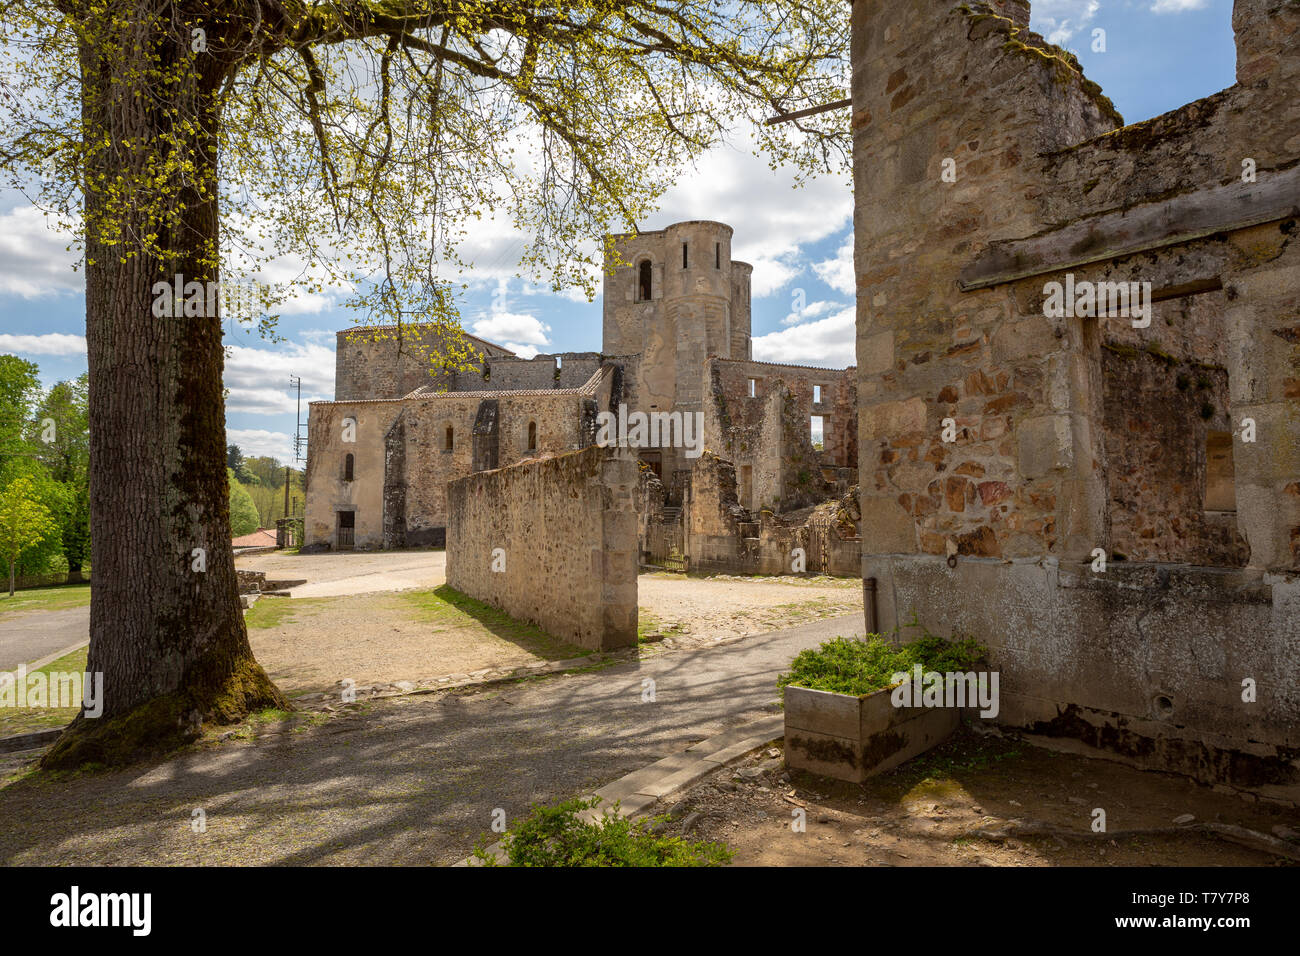 Oradour-sur-Glane, France - April 29, 2019: The ruins of the village and the church, after the massacre by the german nazi's in 1944 that destroyed it Stock Photo